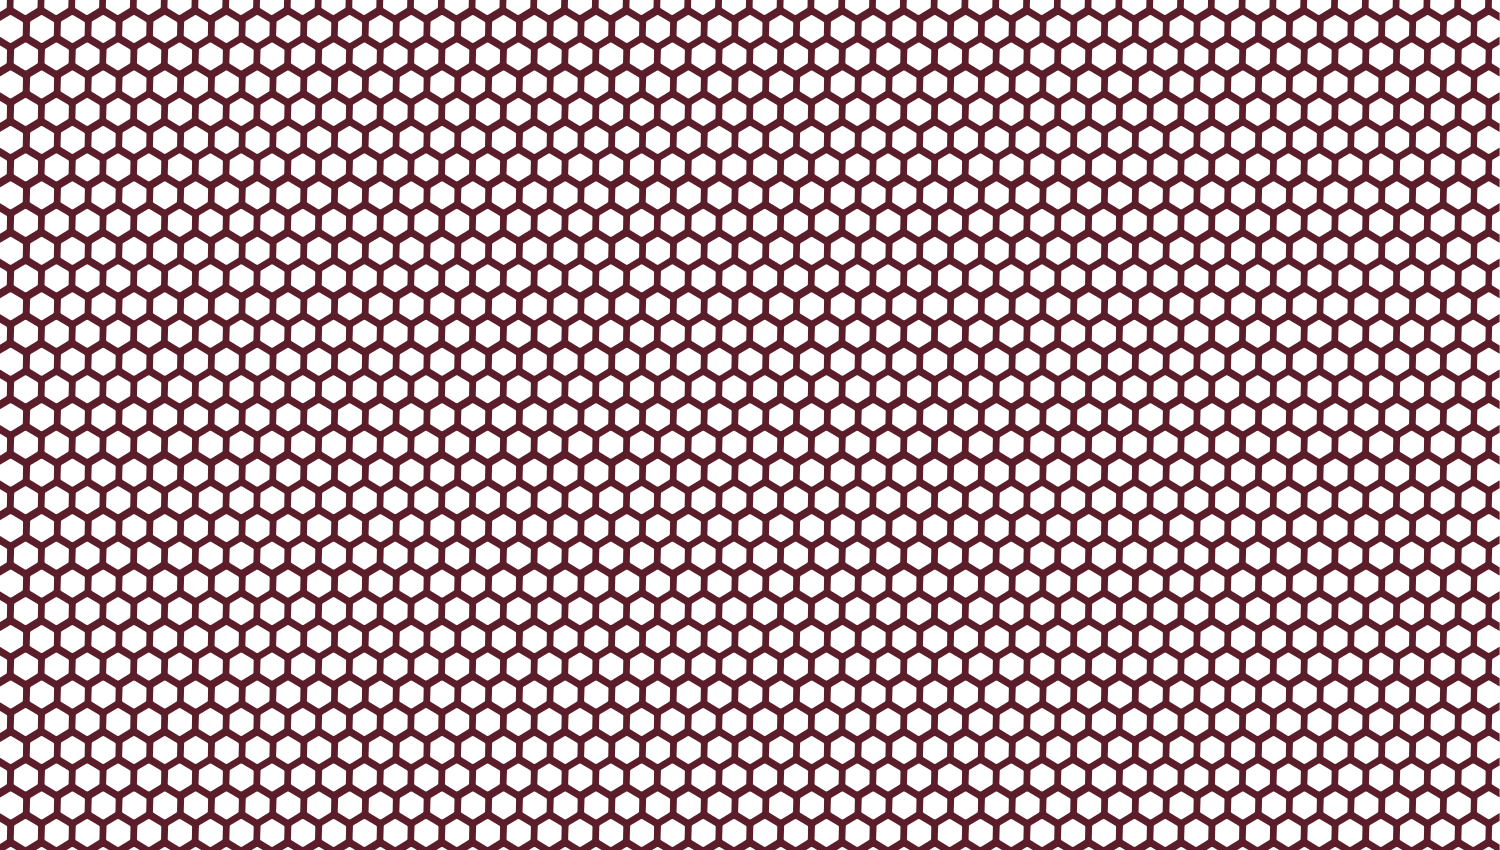 Parasoleil™ Hive© pattern displayed with a burgundy color overlay